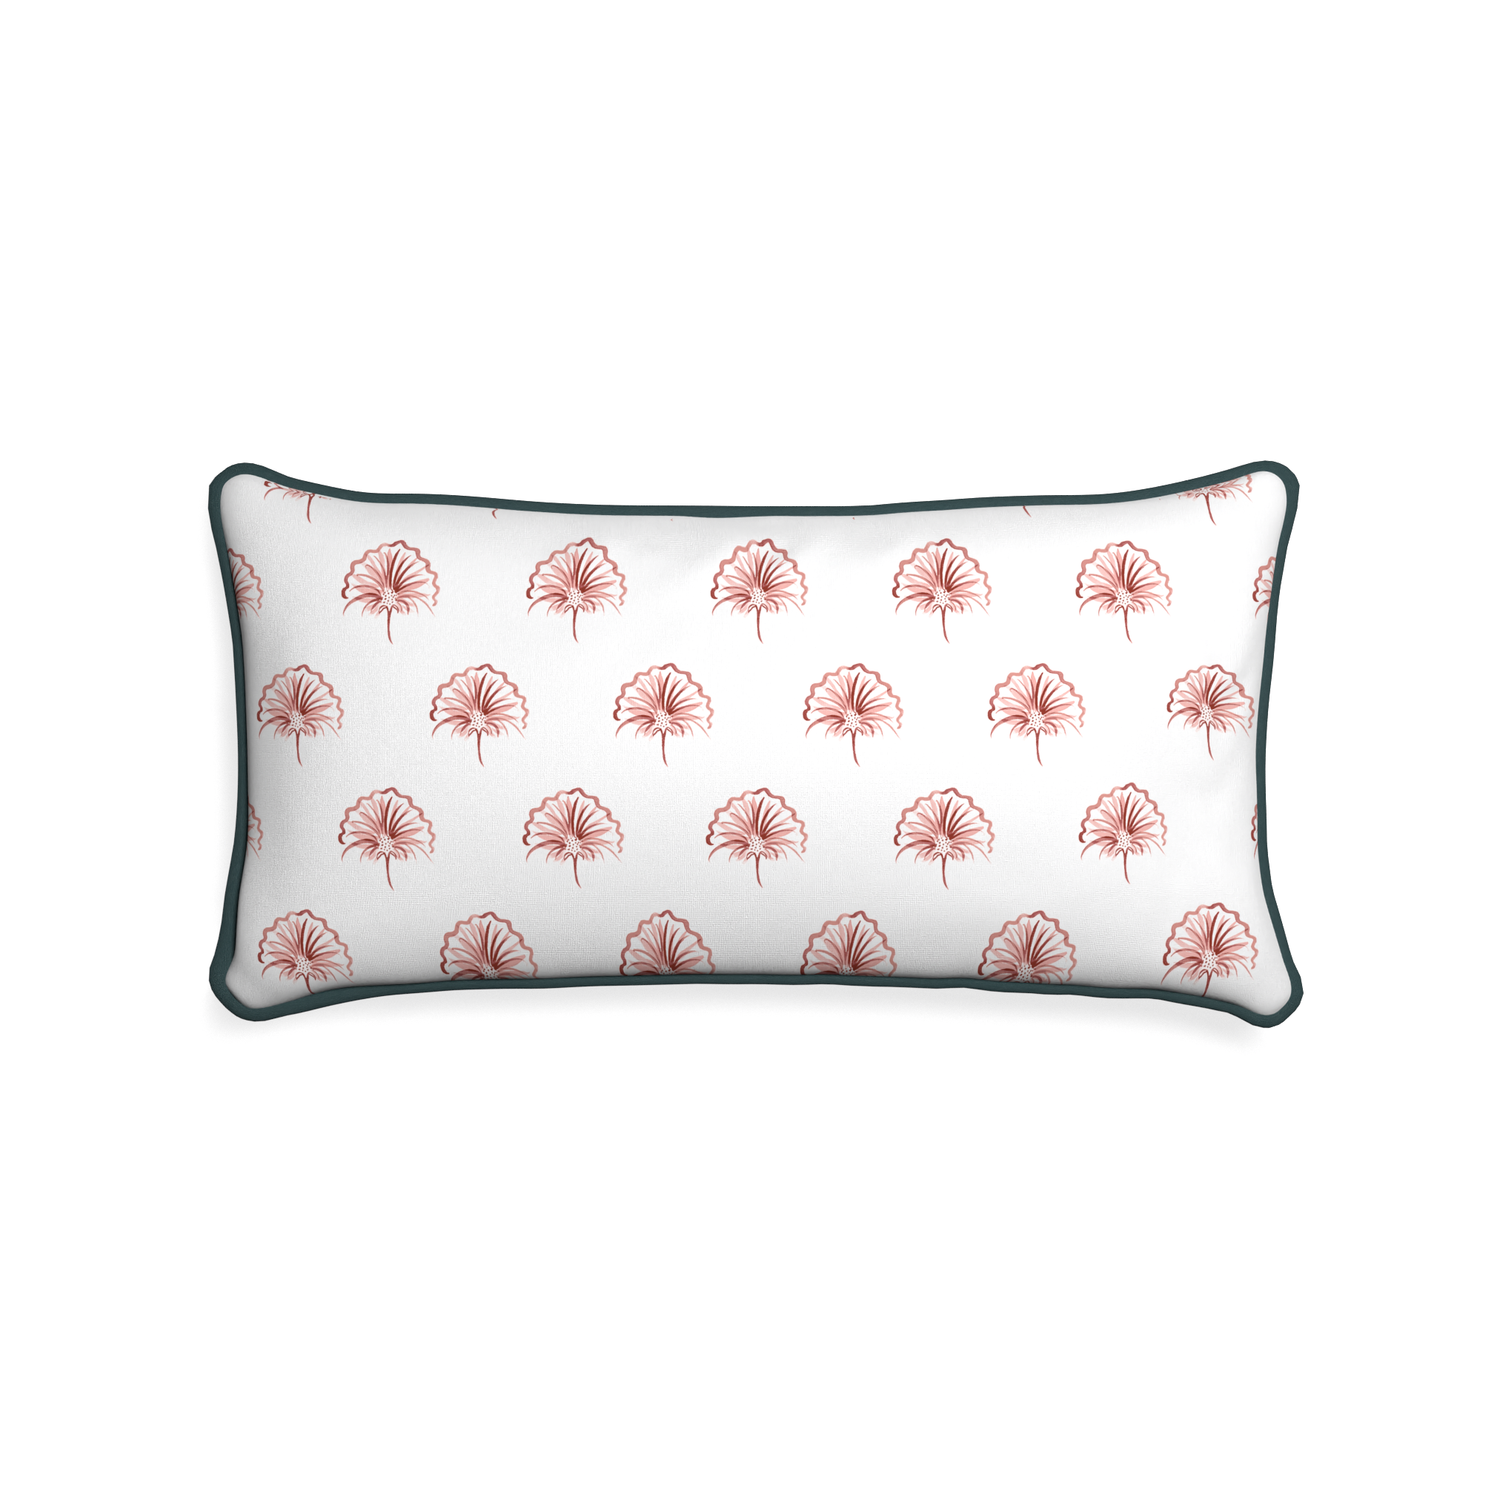 Midi-lumbar penelope rose custom floral pinkpillow with p piping on white background